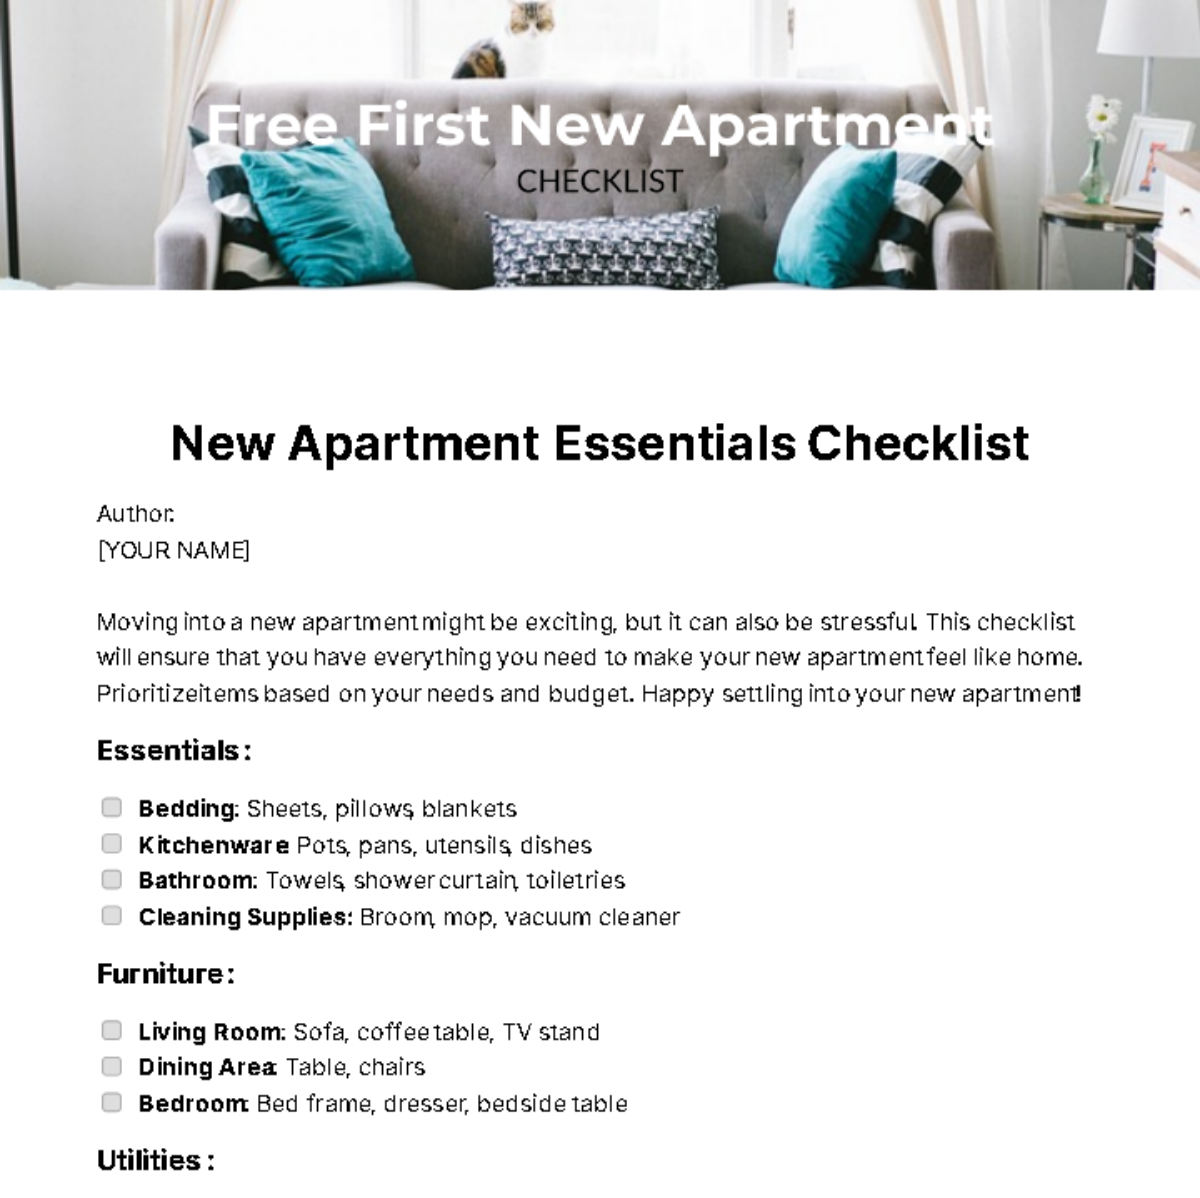 First New Apartment Checklist Template